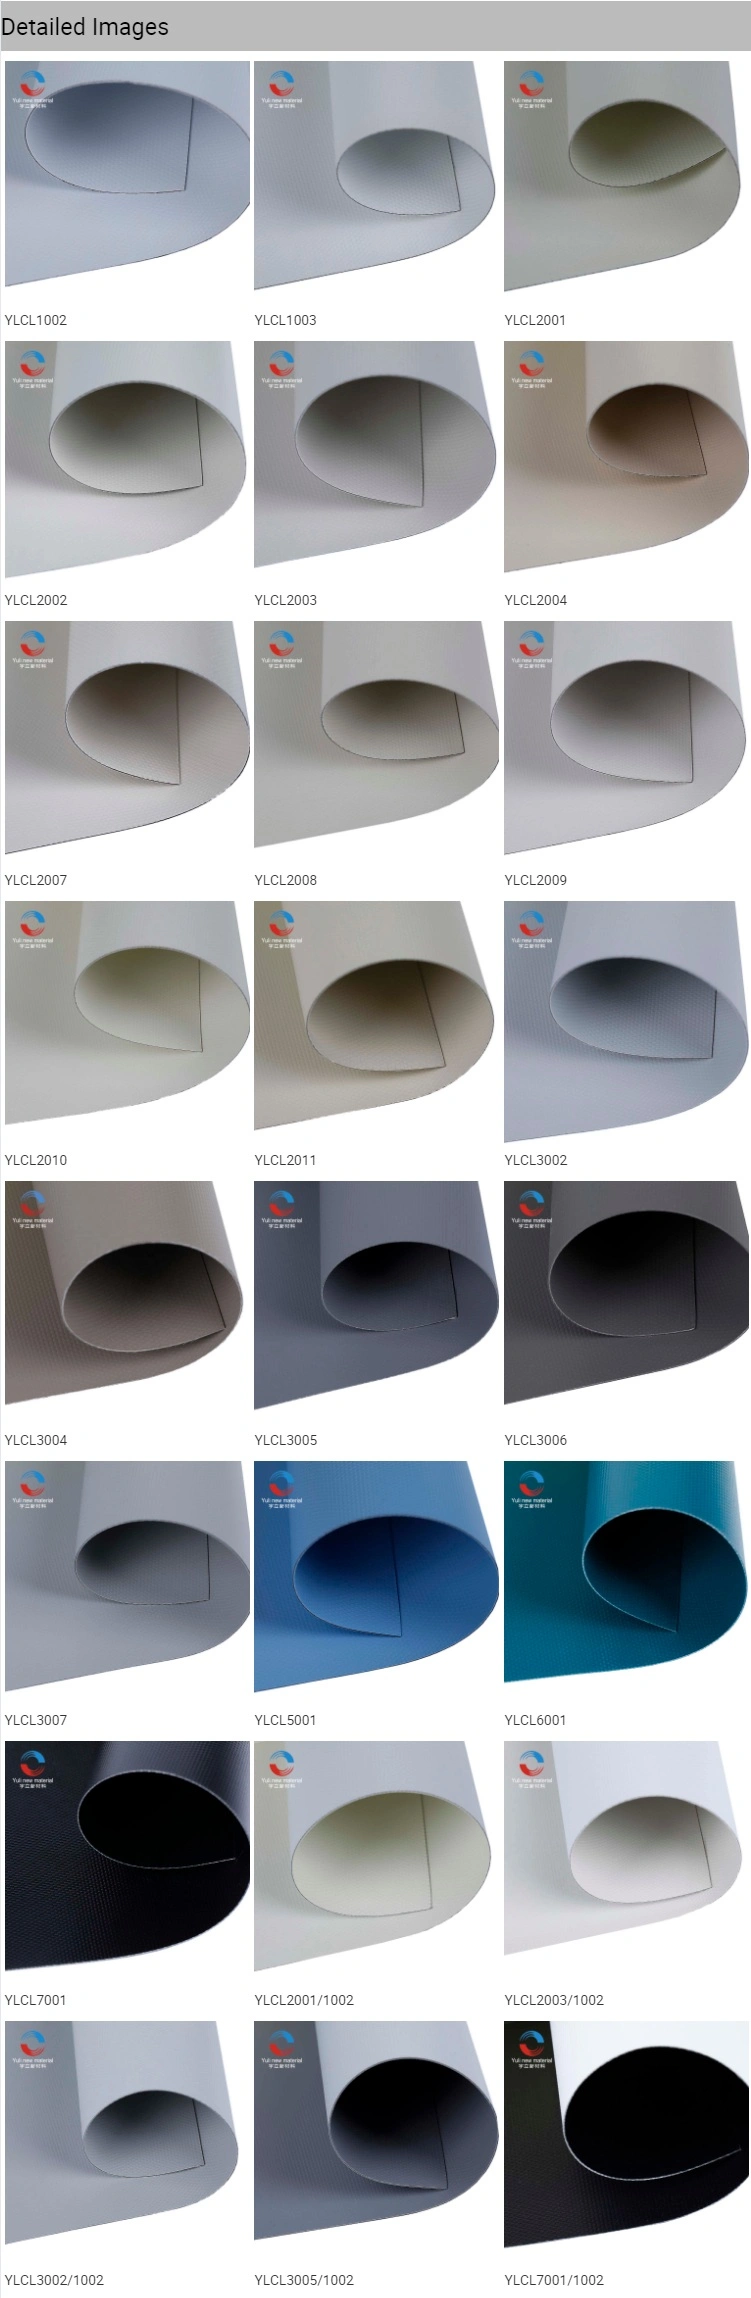 Ylcl3004 Normal Fiberglass Window Curtain Material for Roller Blinds Sunshade